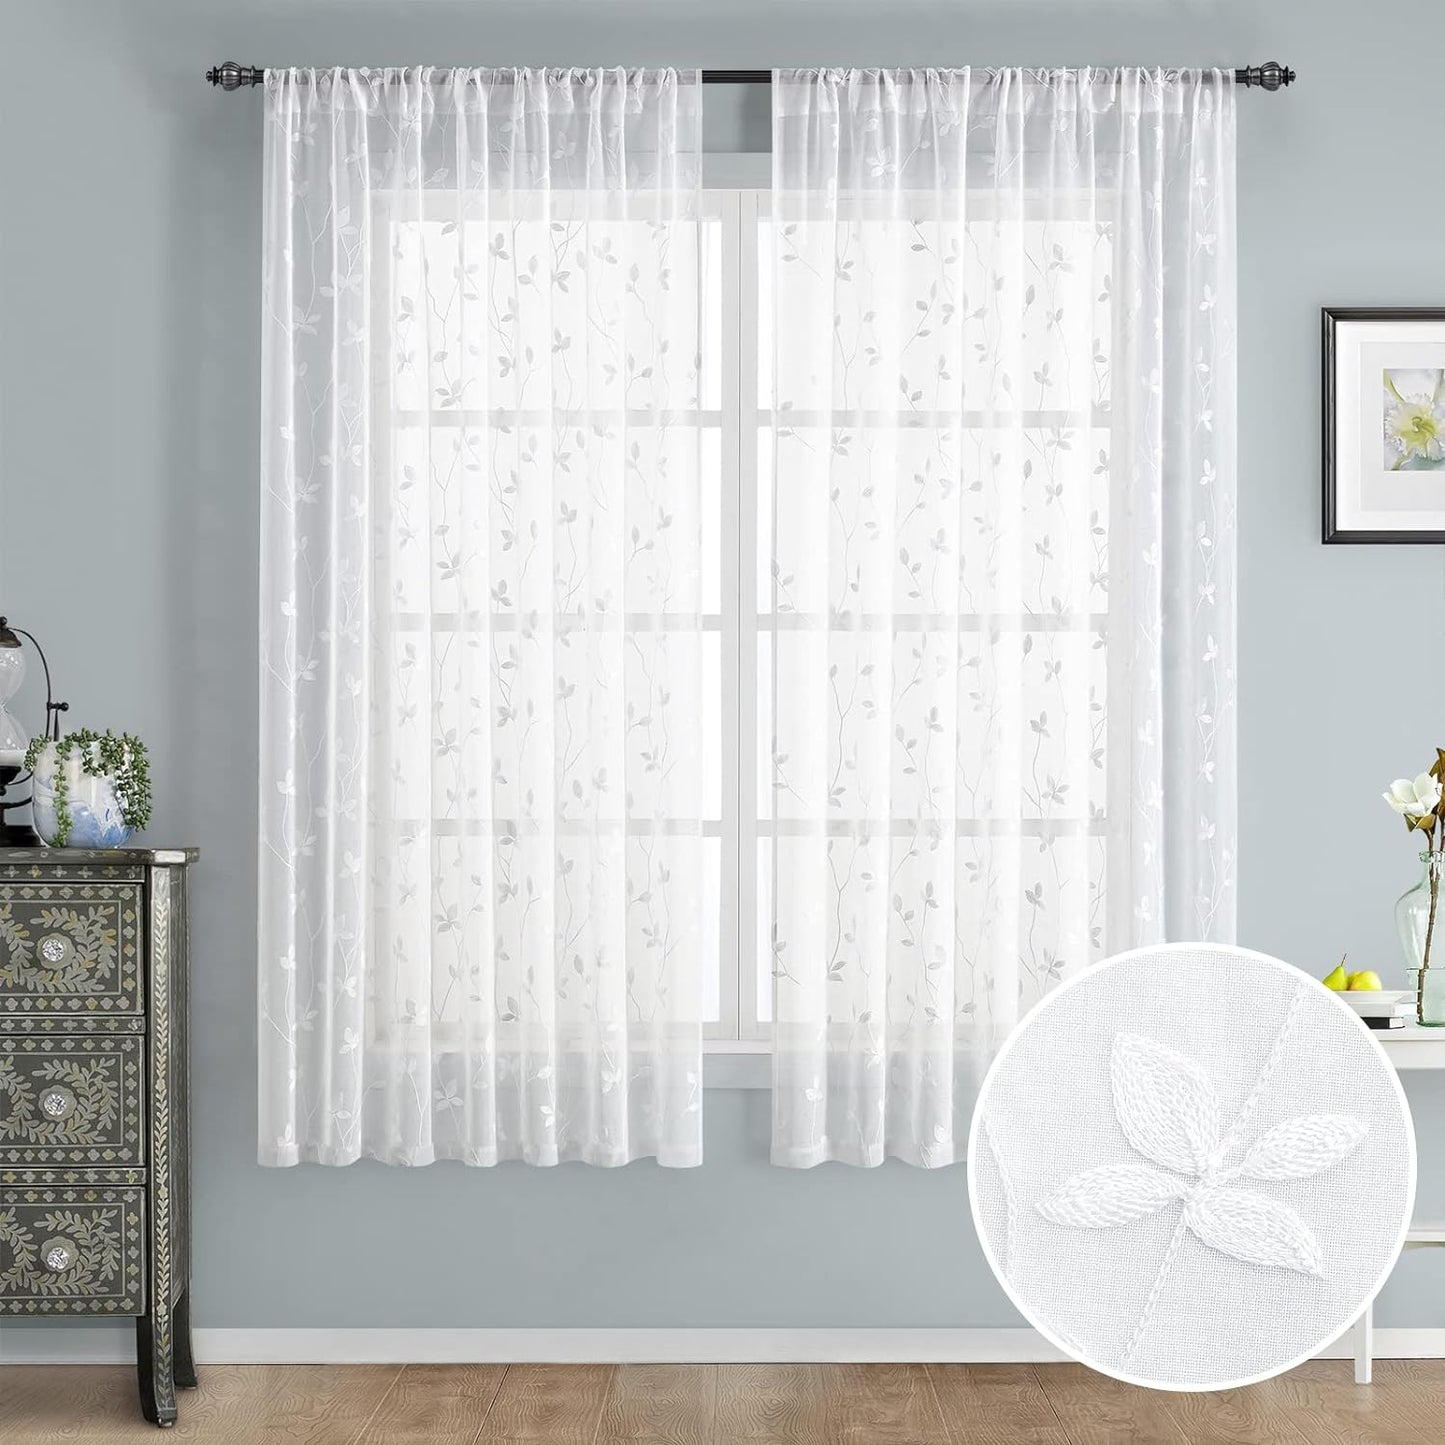 HOMEIDEAS Sage Green Sheer Curtains 52 X 63 Inches Length 2 Panels Embroidered Leaf Pattern Pocket Faux Linen Floral Semi Sheer Voile Window Curtains/Drapes for Bedroom Living Room  HOMEIDEAS Vine White W52" X L63" 